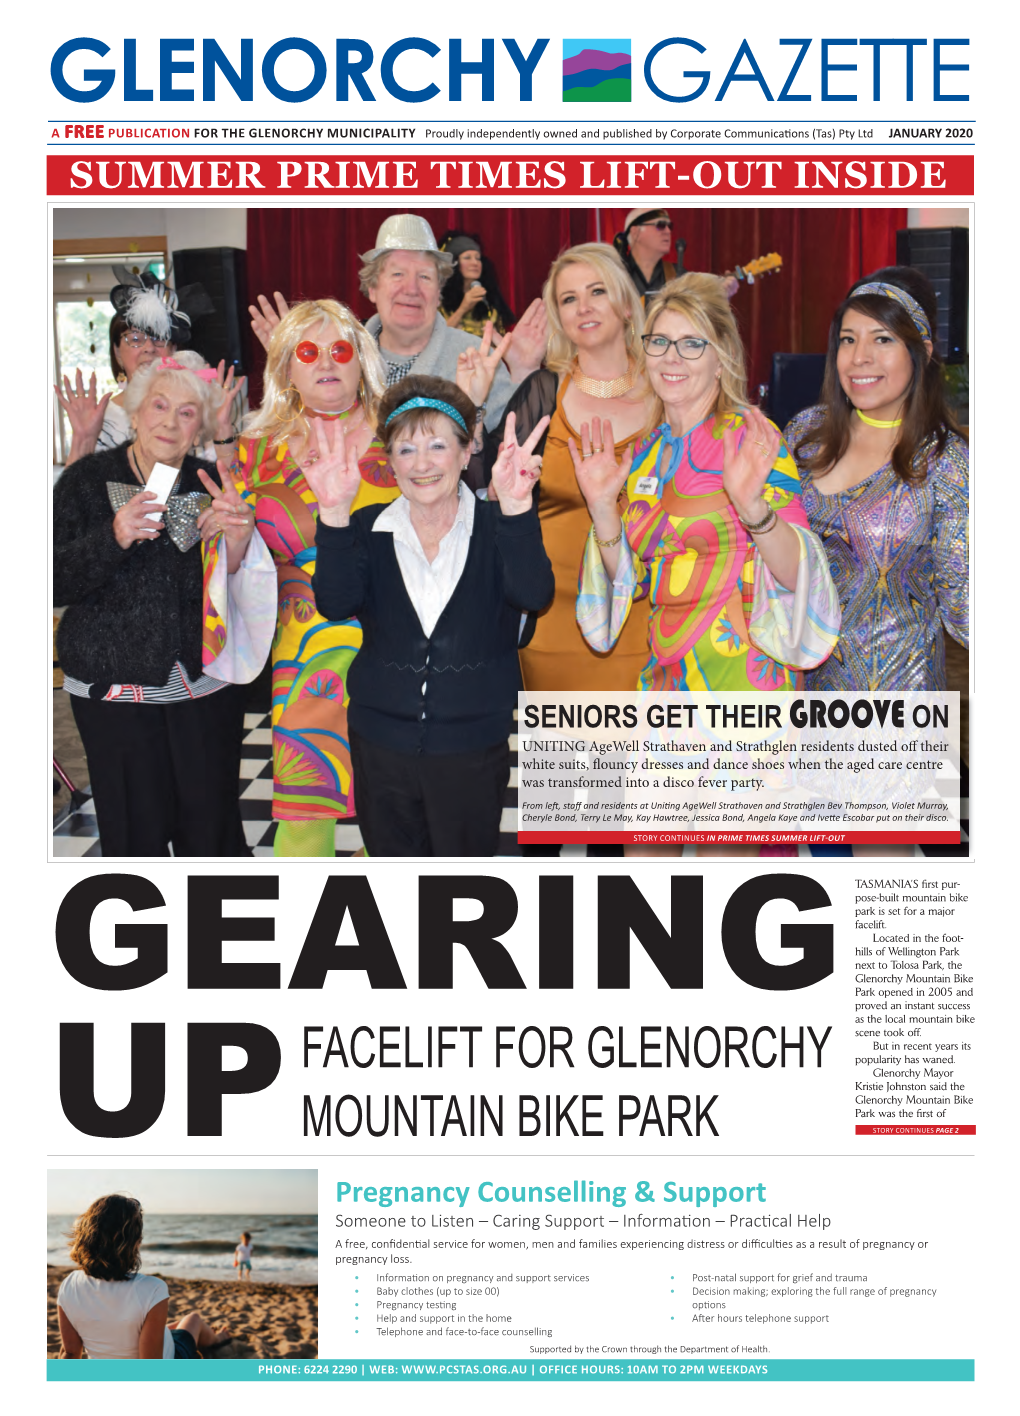 Facelift for Glenorchy Mountain Bike Park from FRONT PAGE Its Type in Tasmania and for Several Years, It Was at the Leading Edge of the Sport in Southern Tasmania